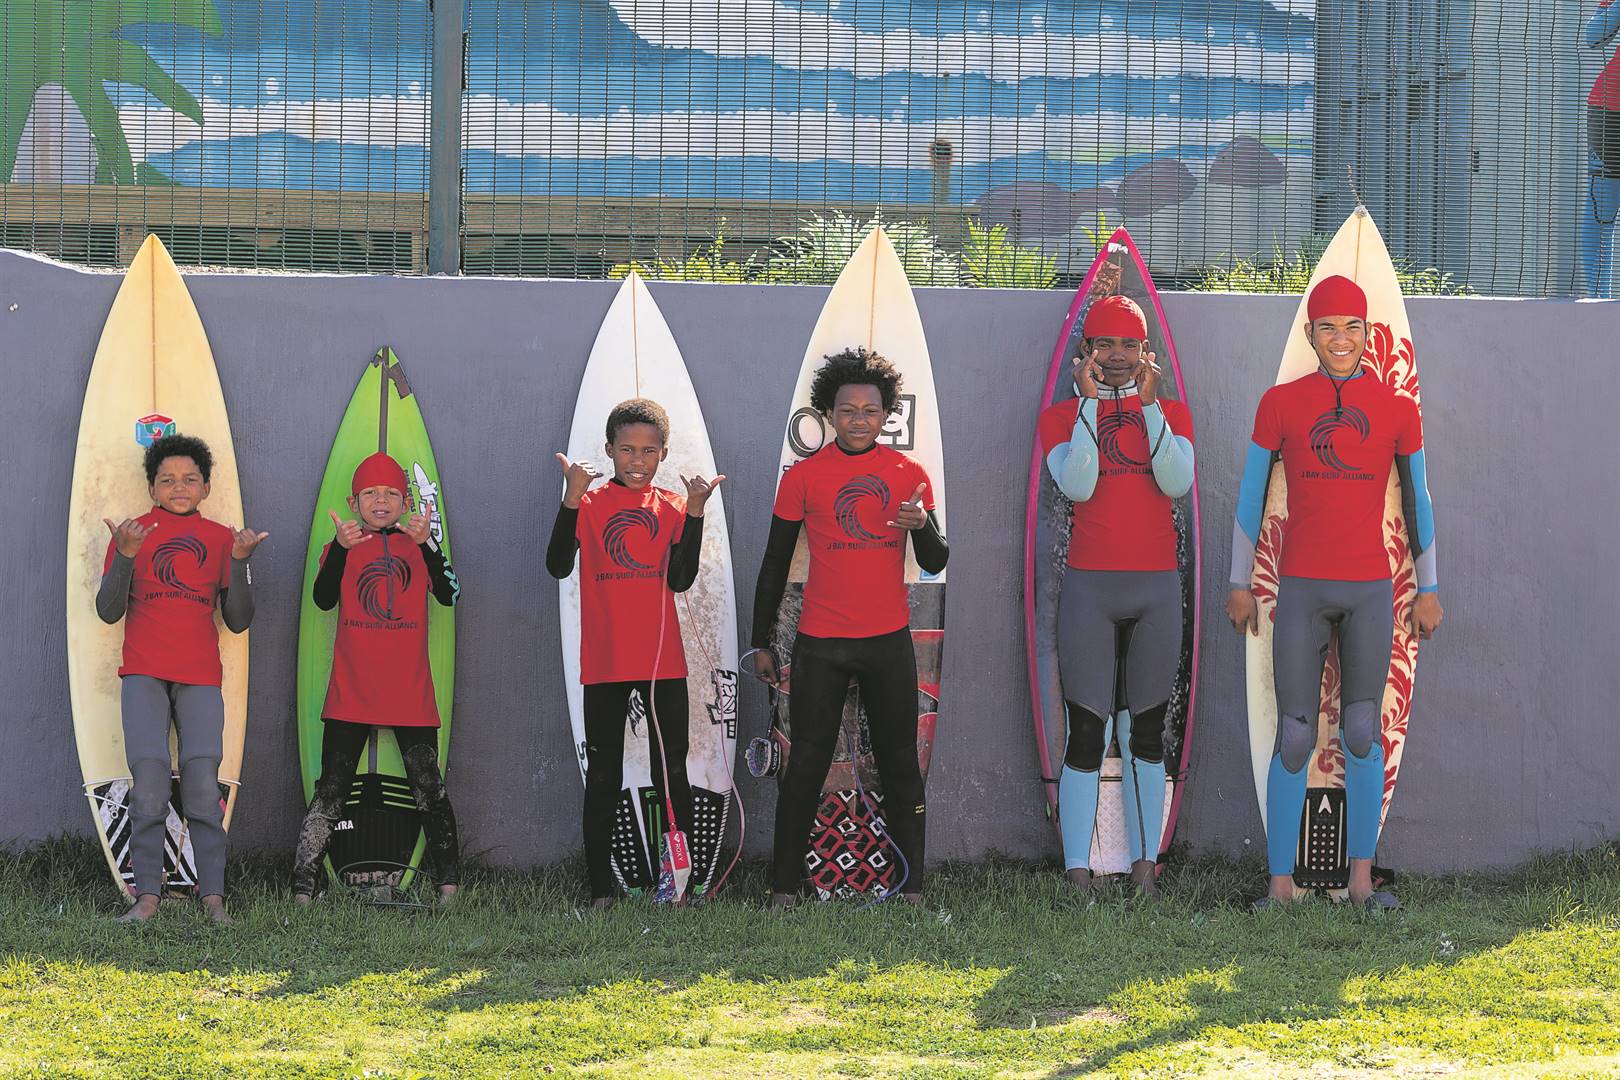 At the Jeffreys Bay Surf Alliance (JBSA) surf therapy programme the children gather to surf under the guidance of dedicated coaches. Photo: Mike Ruthnum